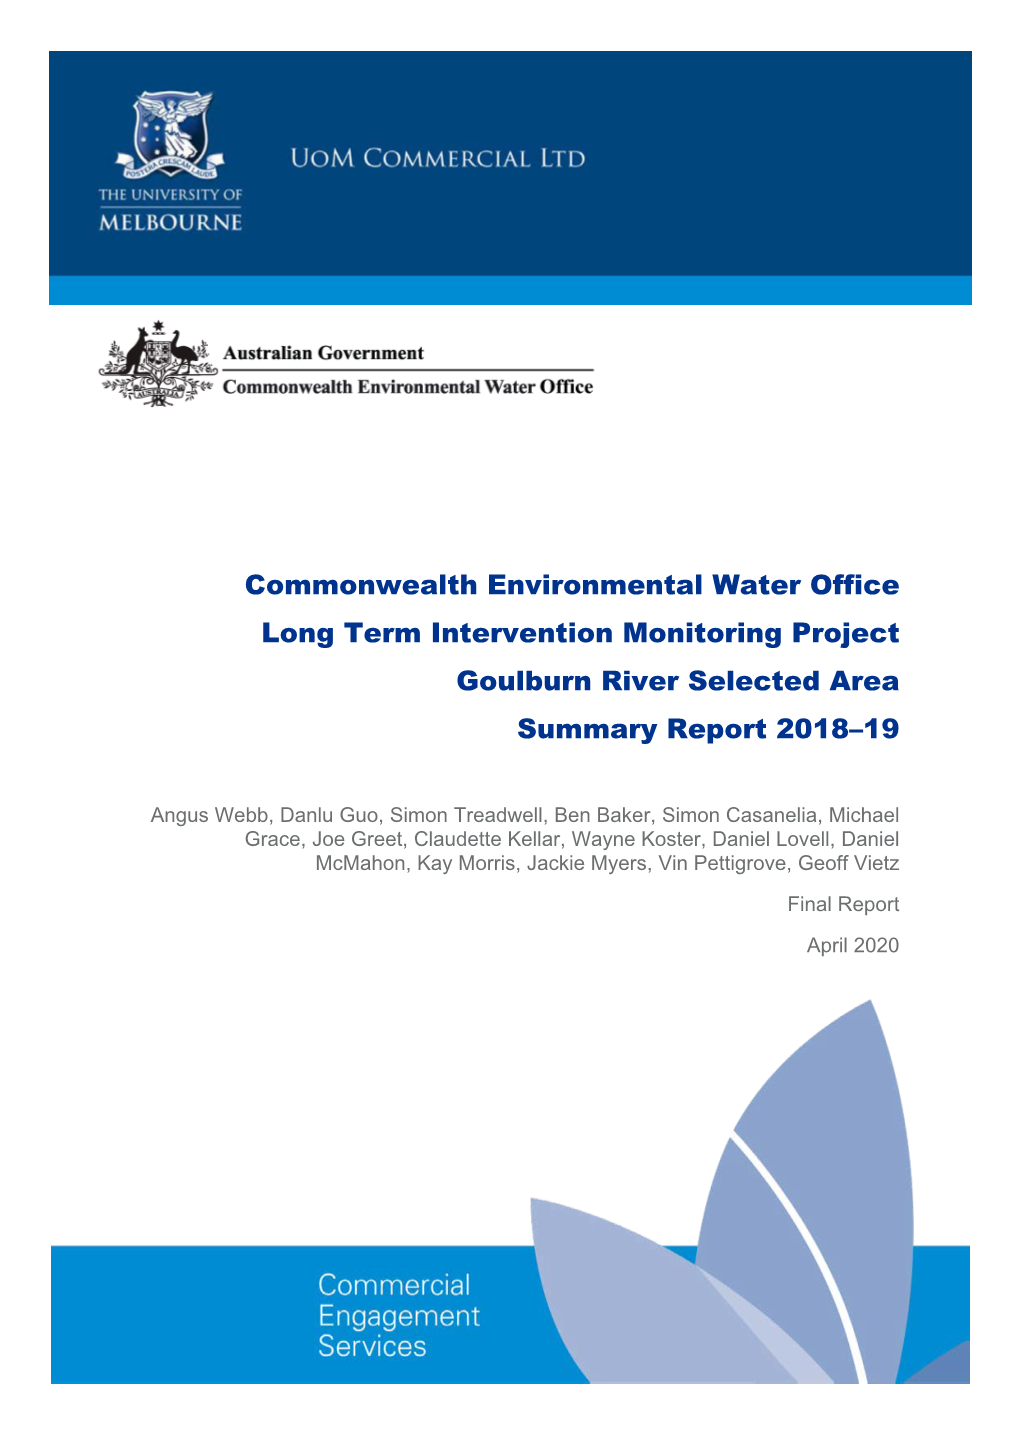 CEWO LTIM Project Goulburn River Selected Area Summary Report